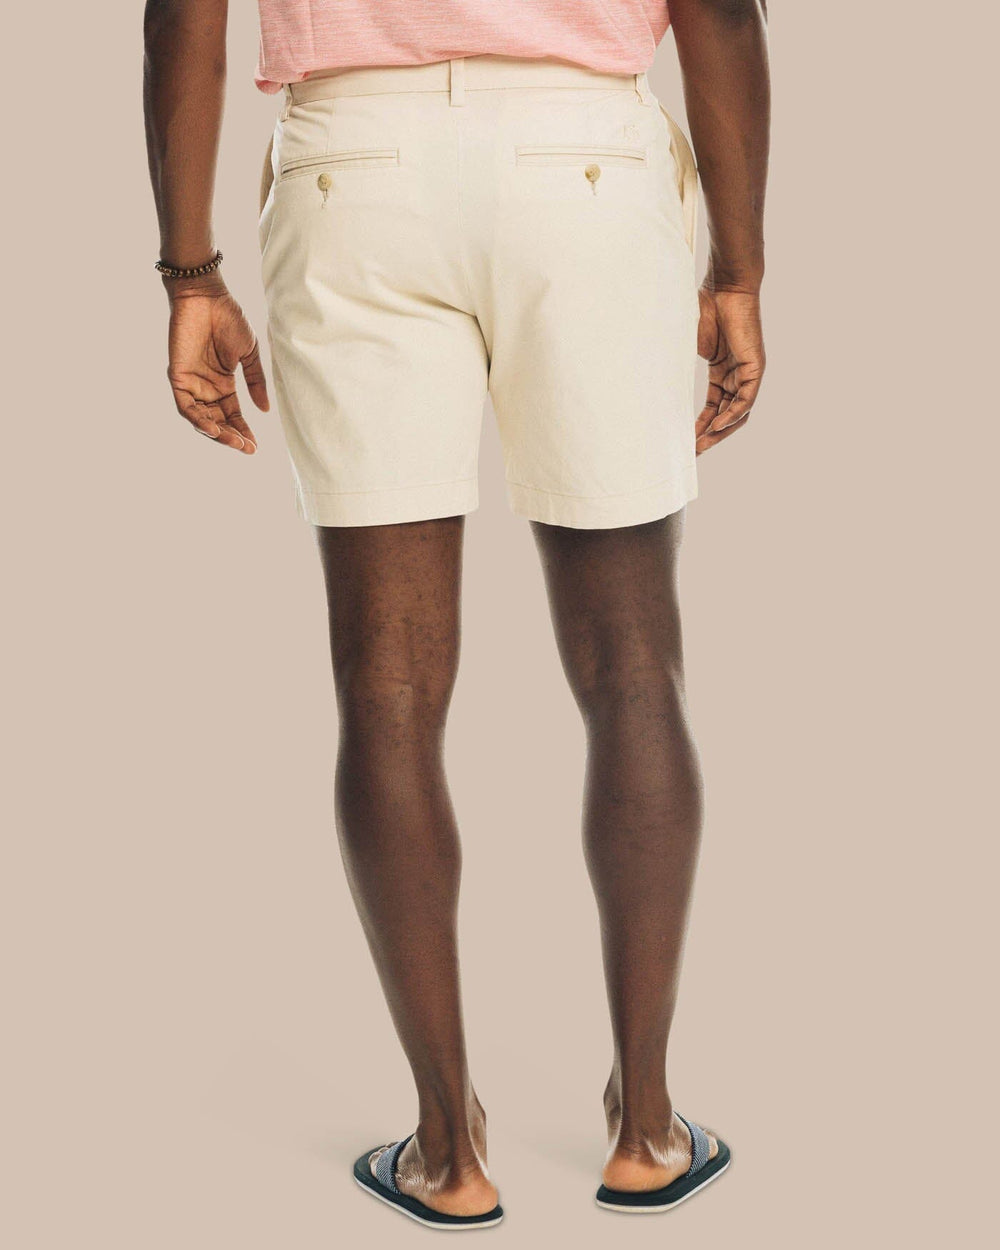 The back view of the Men's New Channel Marker 9 Inch Short by Southern Tide - Light Khaki